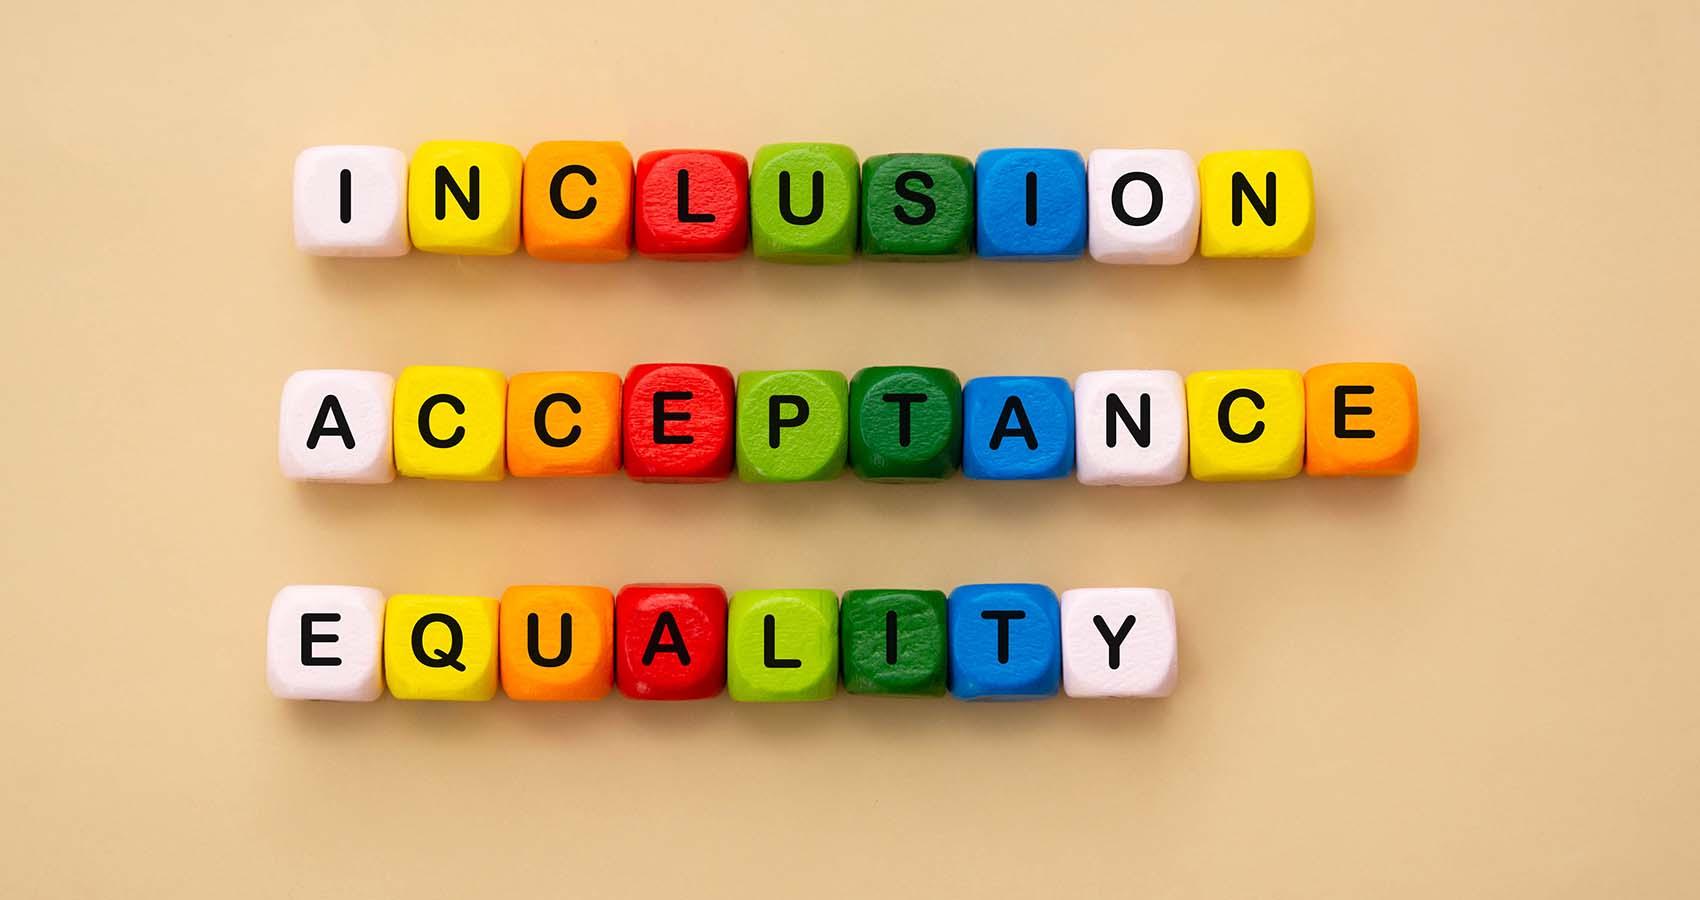 stock photo with the words Inclusion, acceptance, and equality